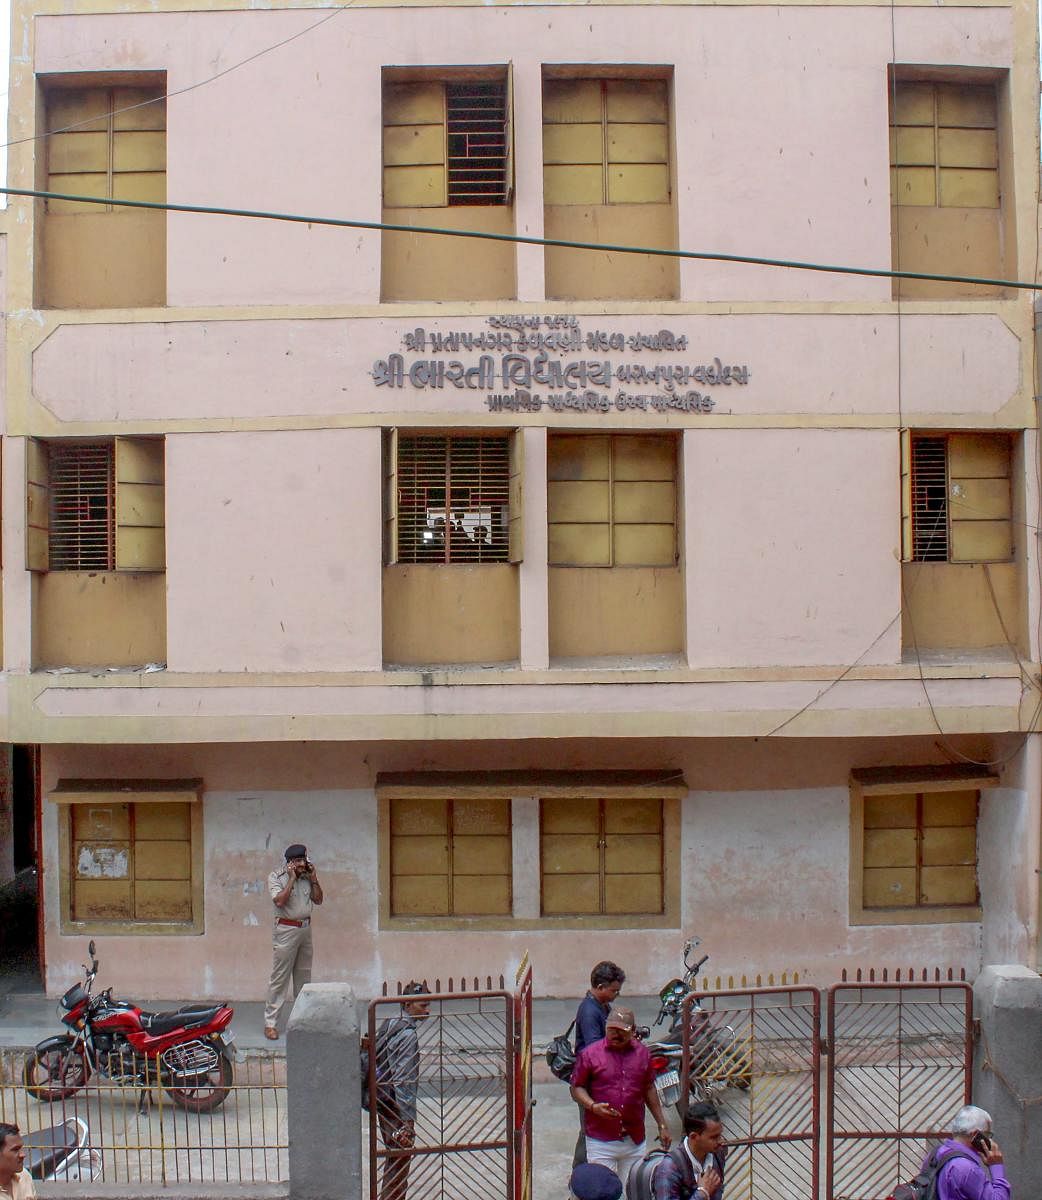 A view of Bharti School where Dev Bhagwandas Tadvi (14), a class IX student, was found with multiple stab wounds in the washroom, in Vadodara on Friday. PTI